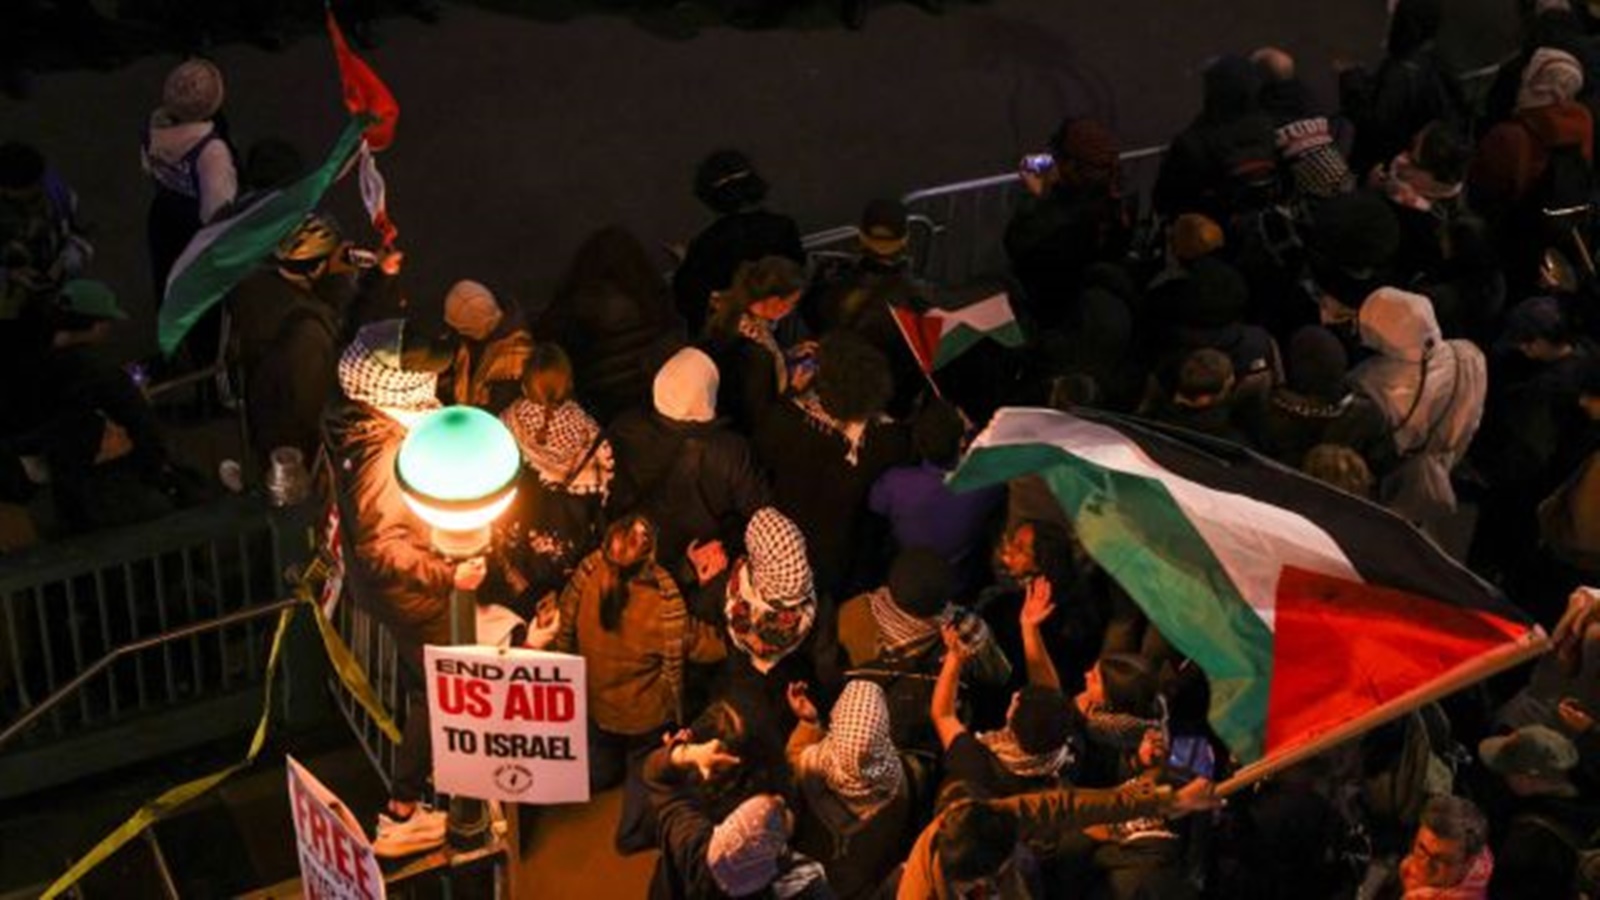 In US, campus protests over Gaza intensify amid pushback by universities and Police